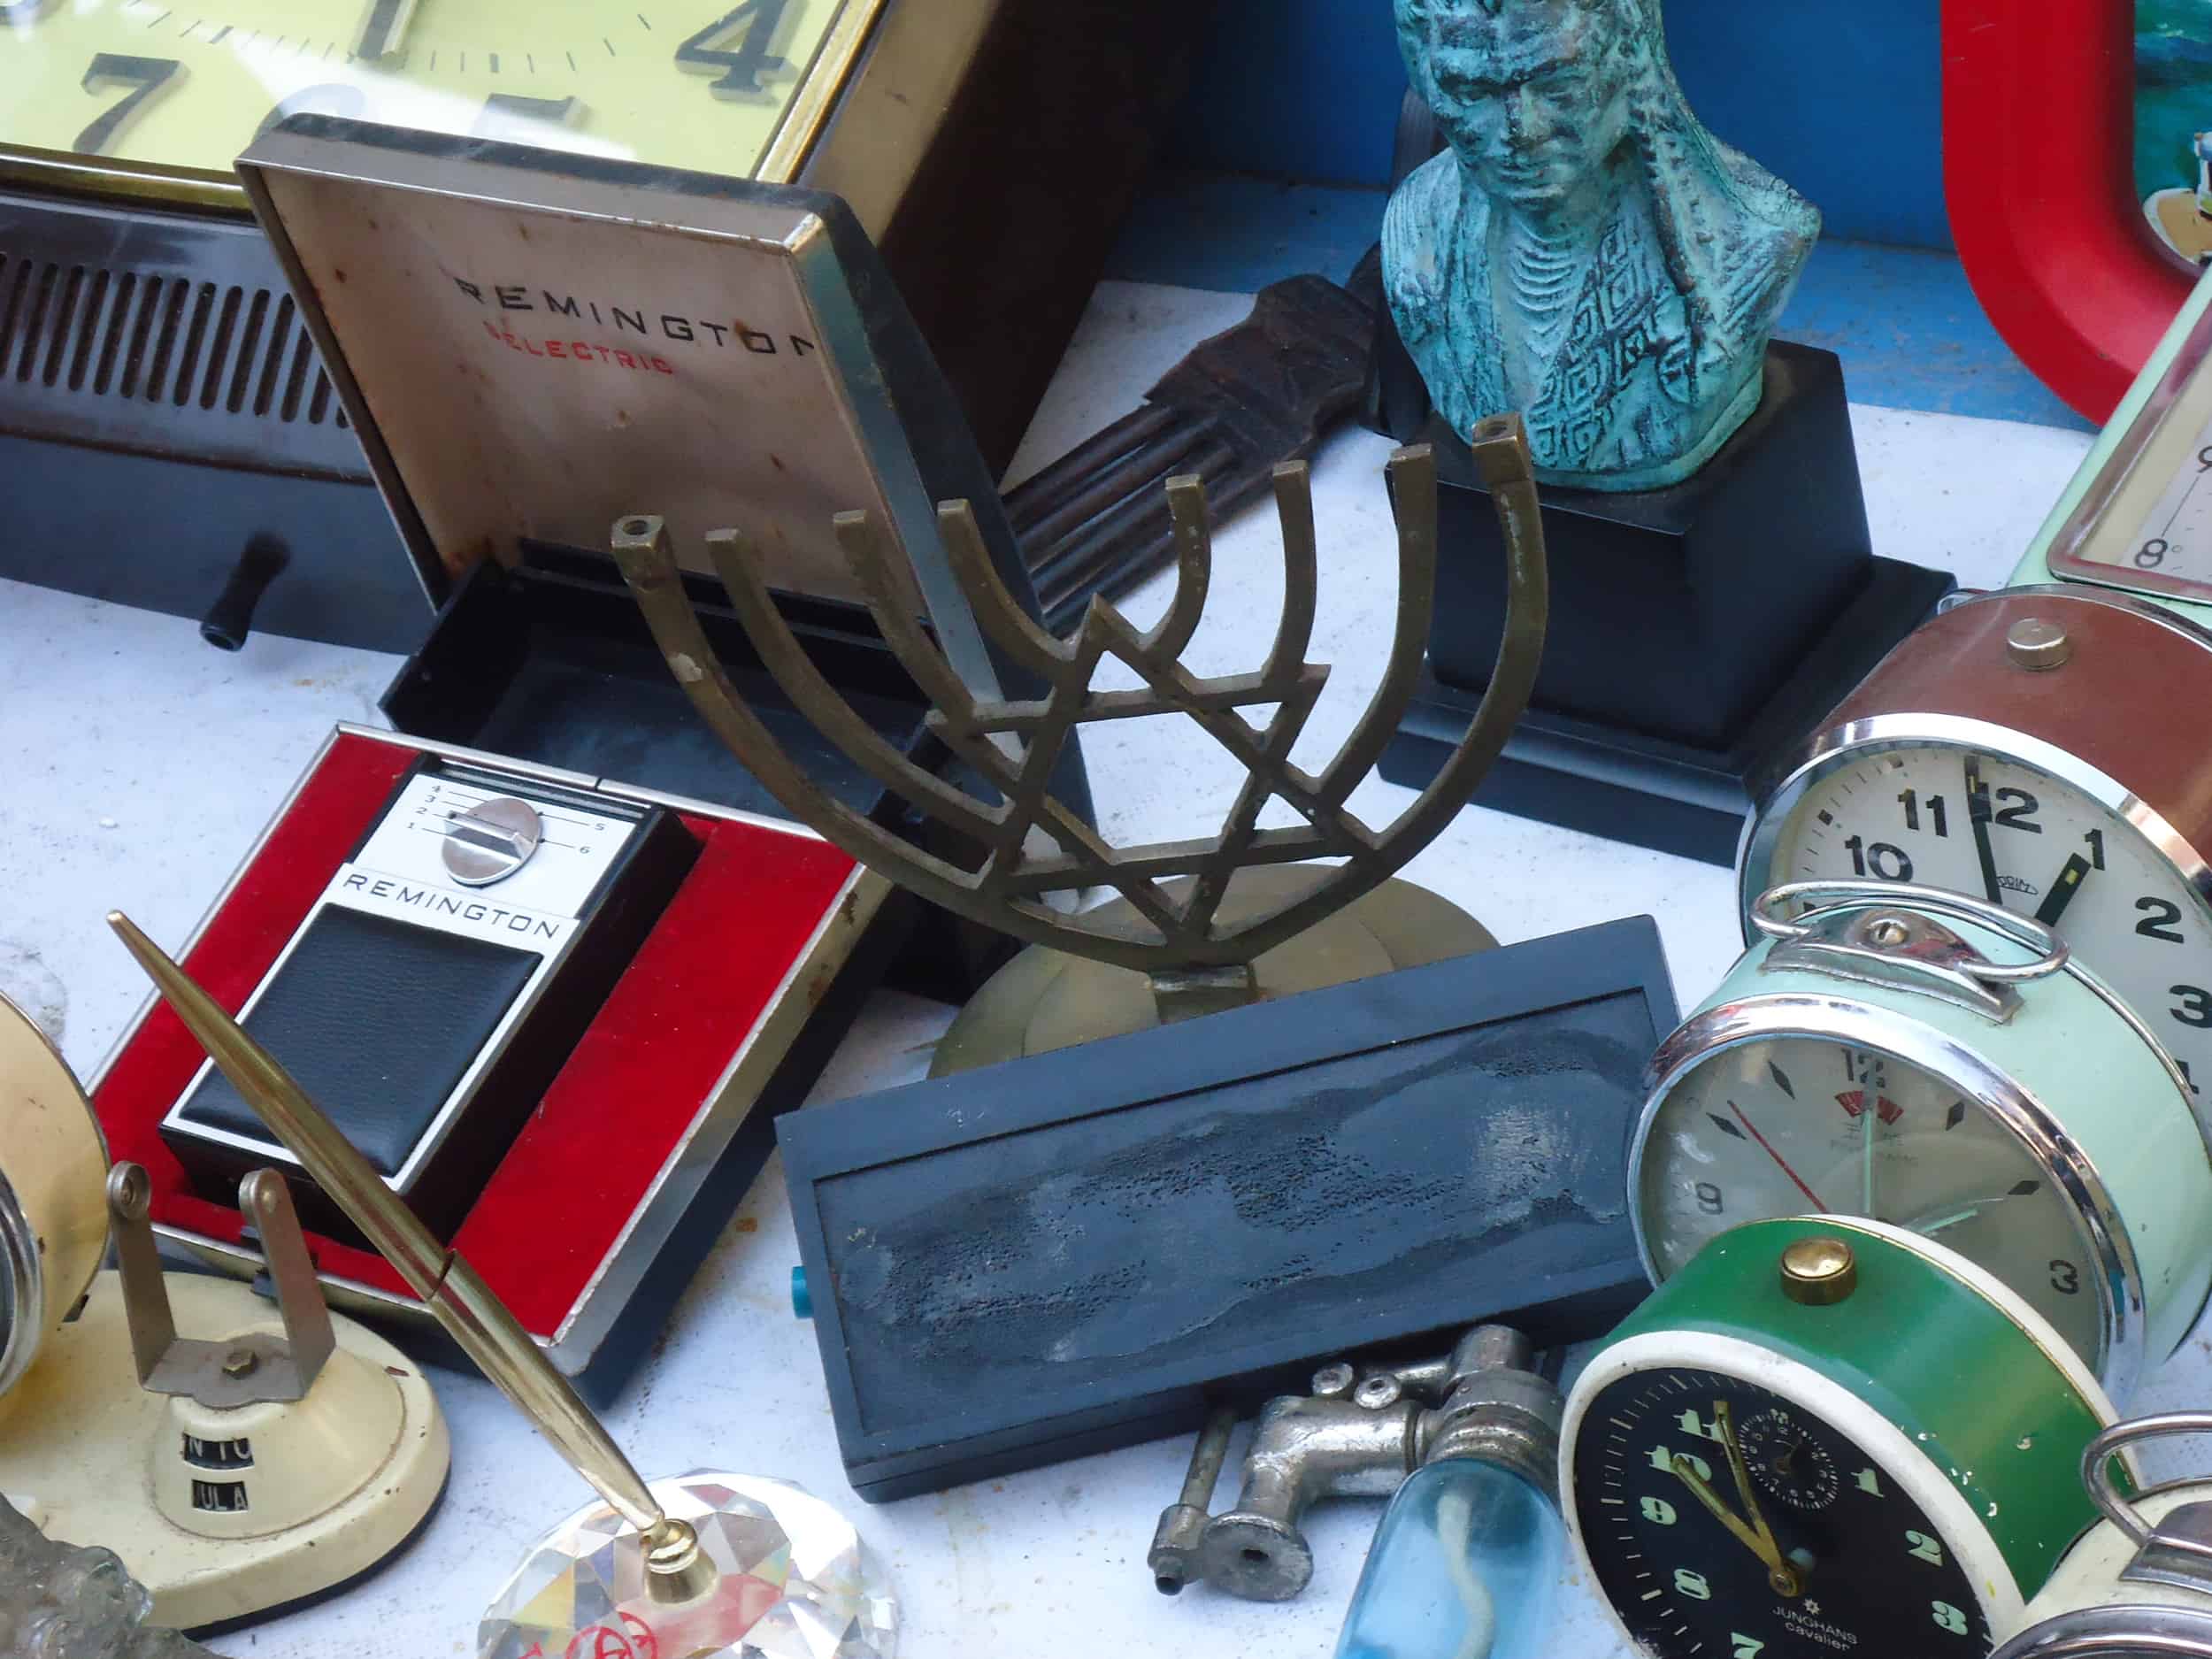 Items for sale at the flea market